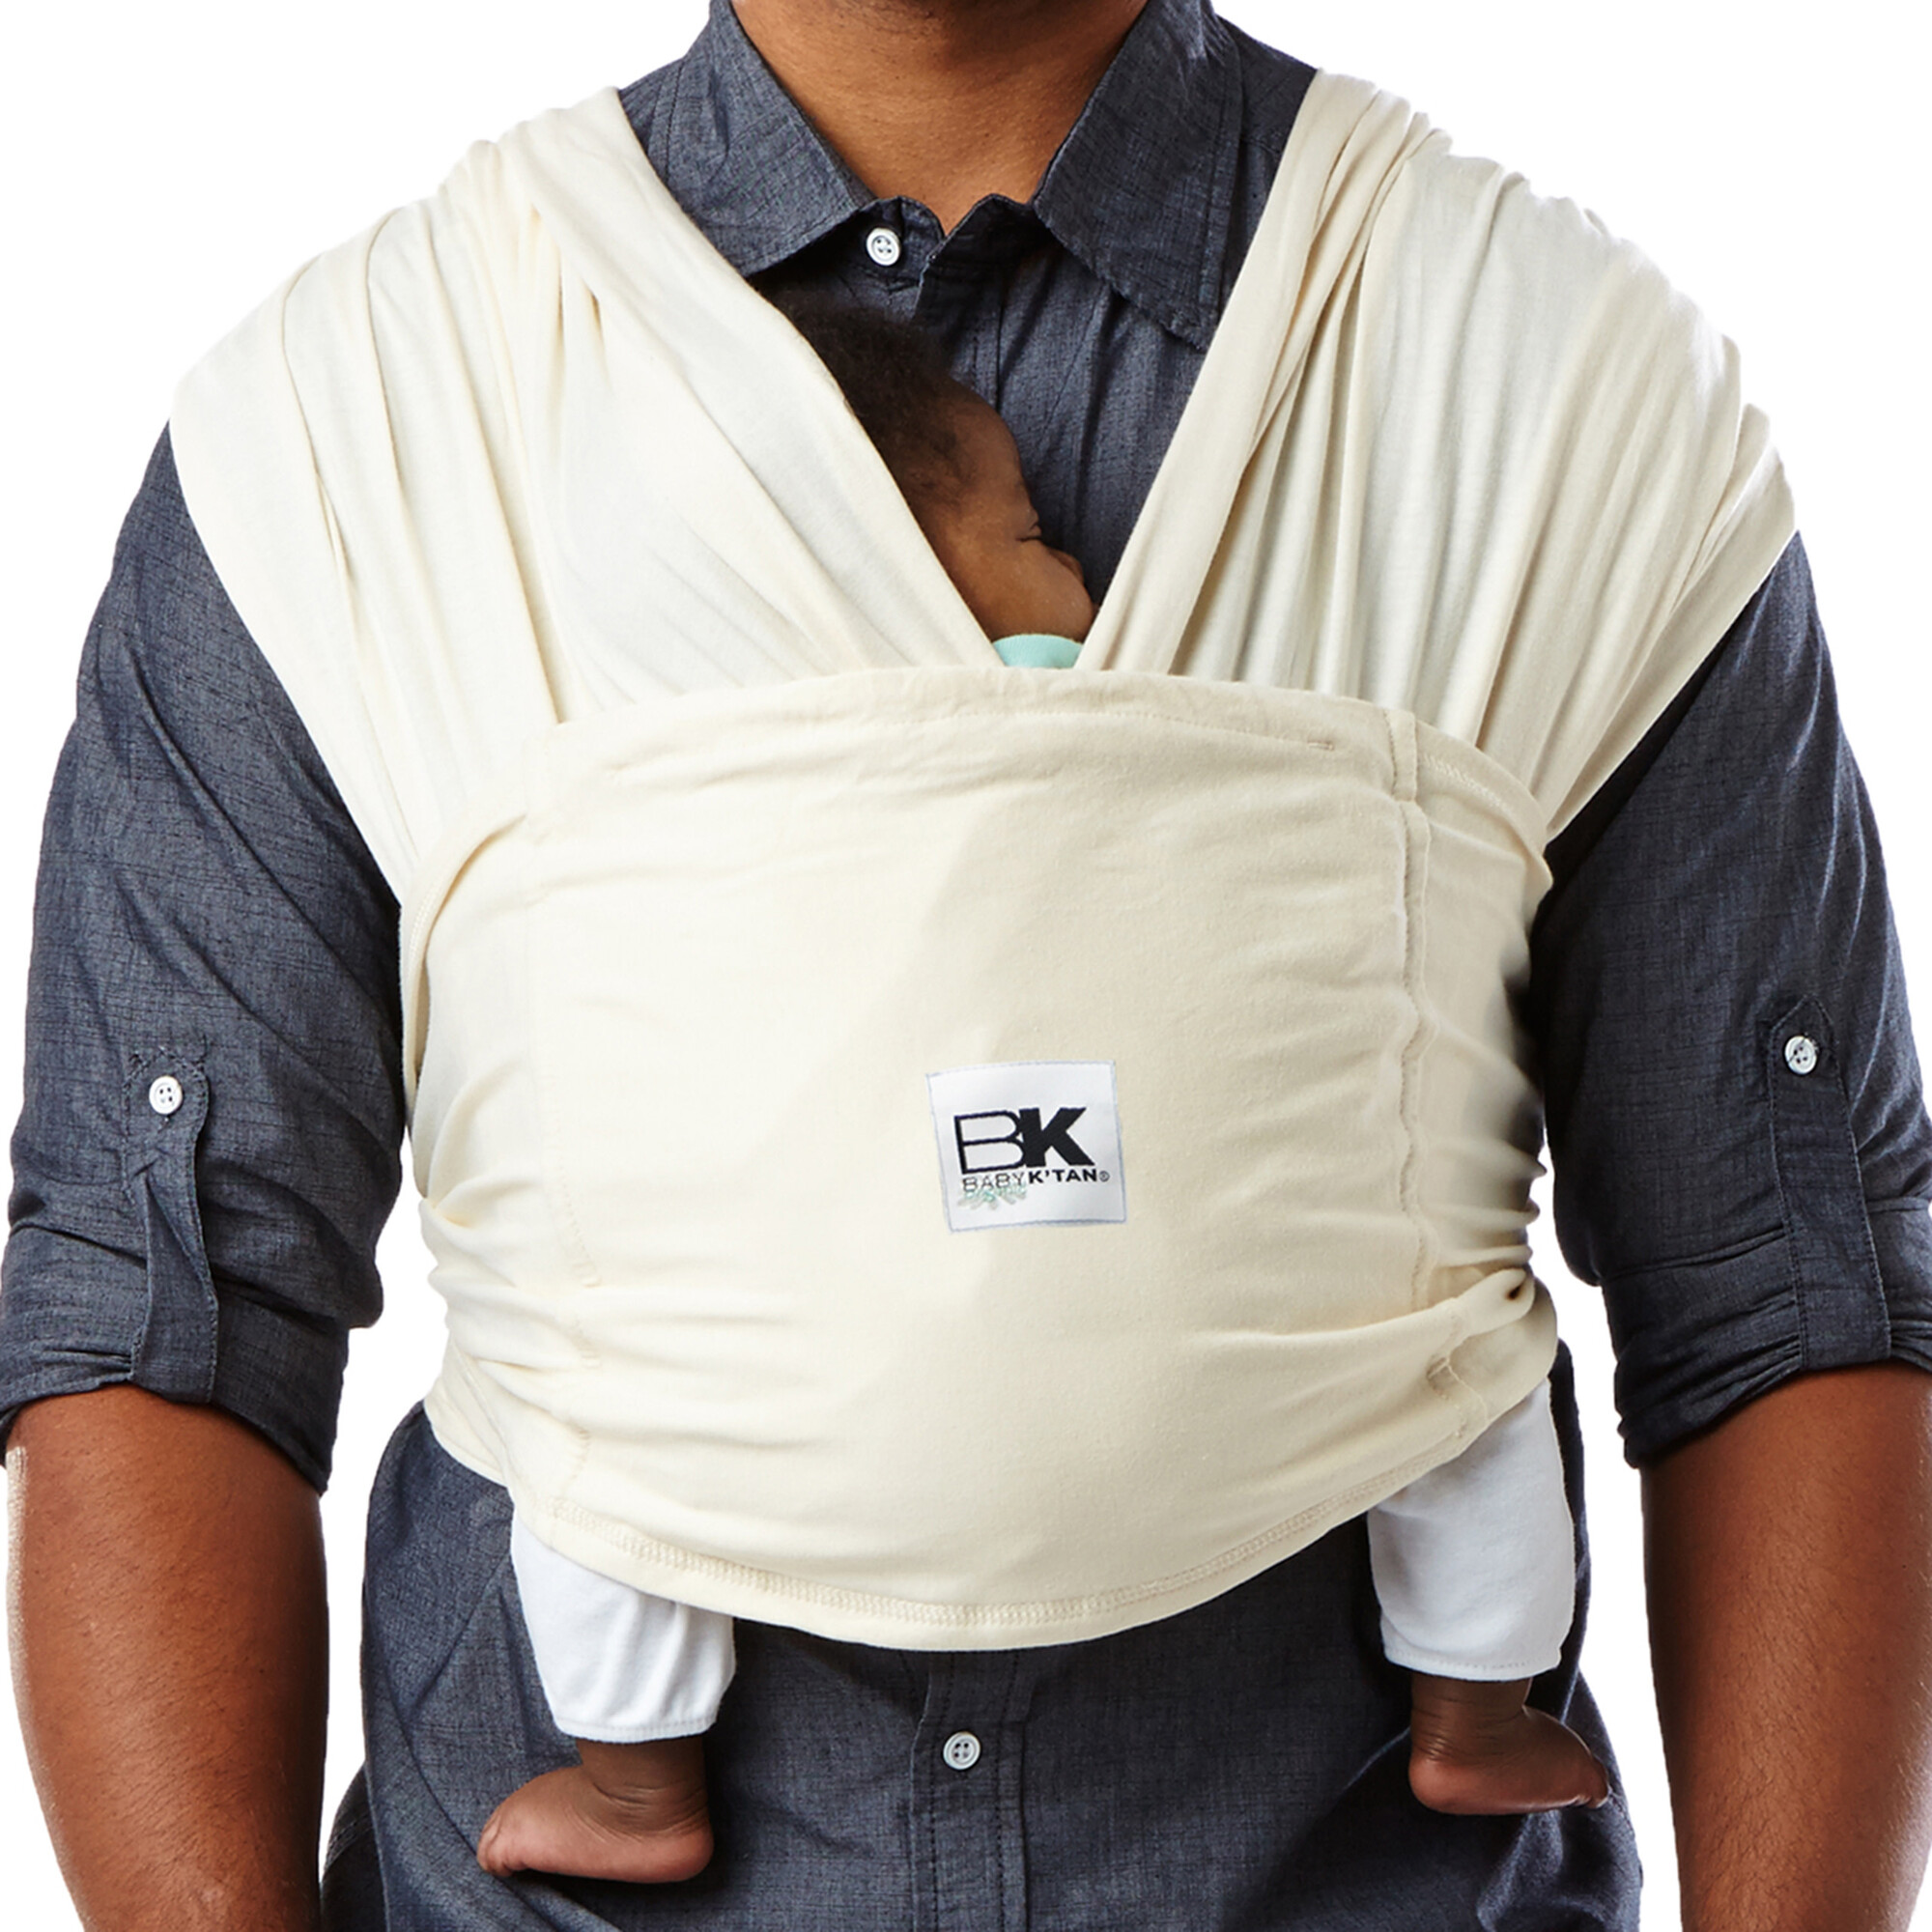 Organic Baby Carrier